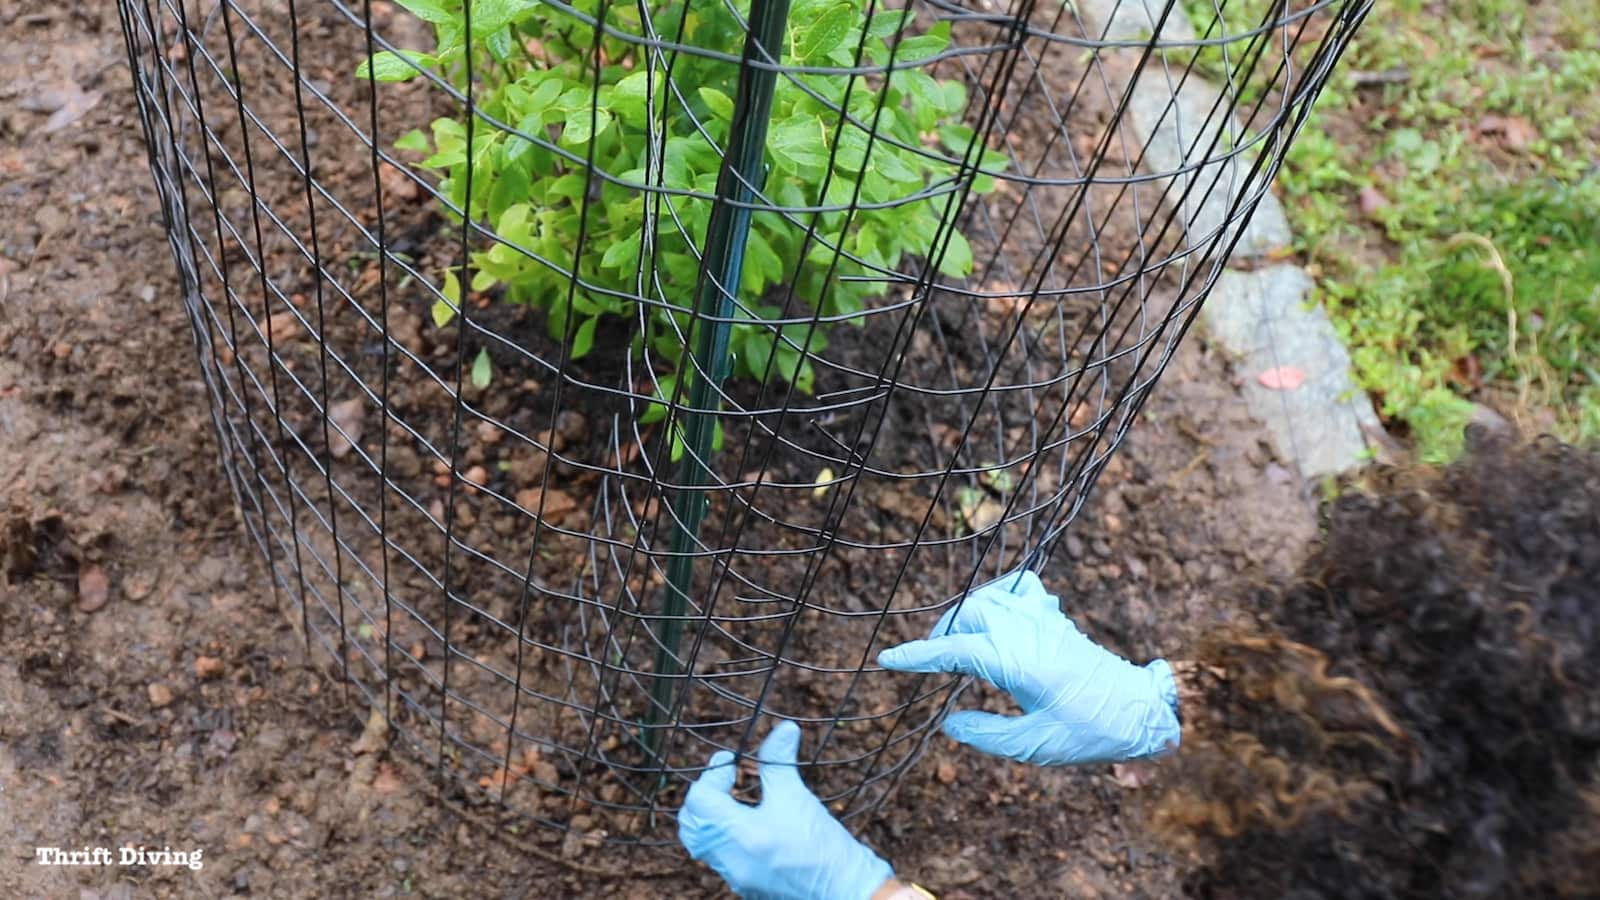 Add fencing around blueberry bushes to protect them from deer. Add netting to keep birds out of blueberry bushes.